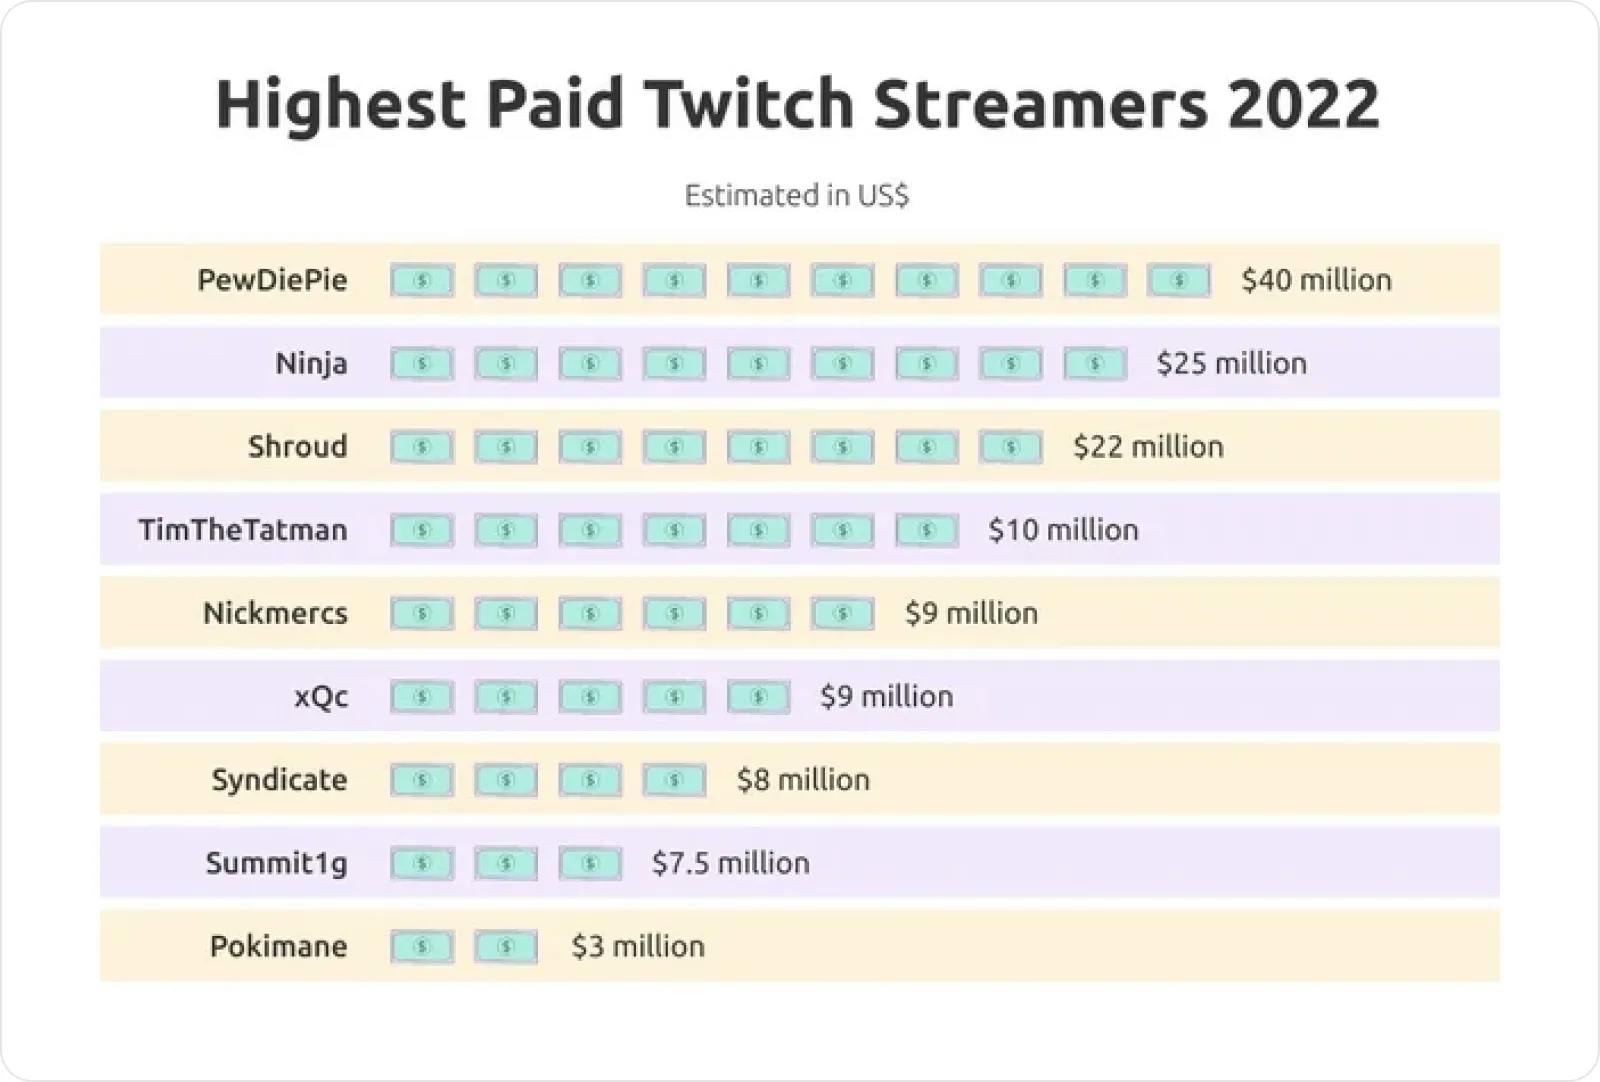 Highest paid twitch streamers in 2022